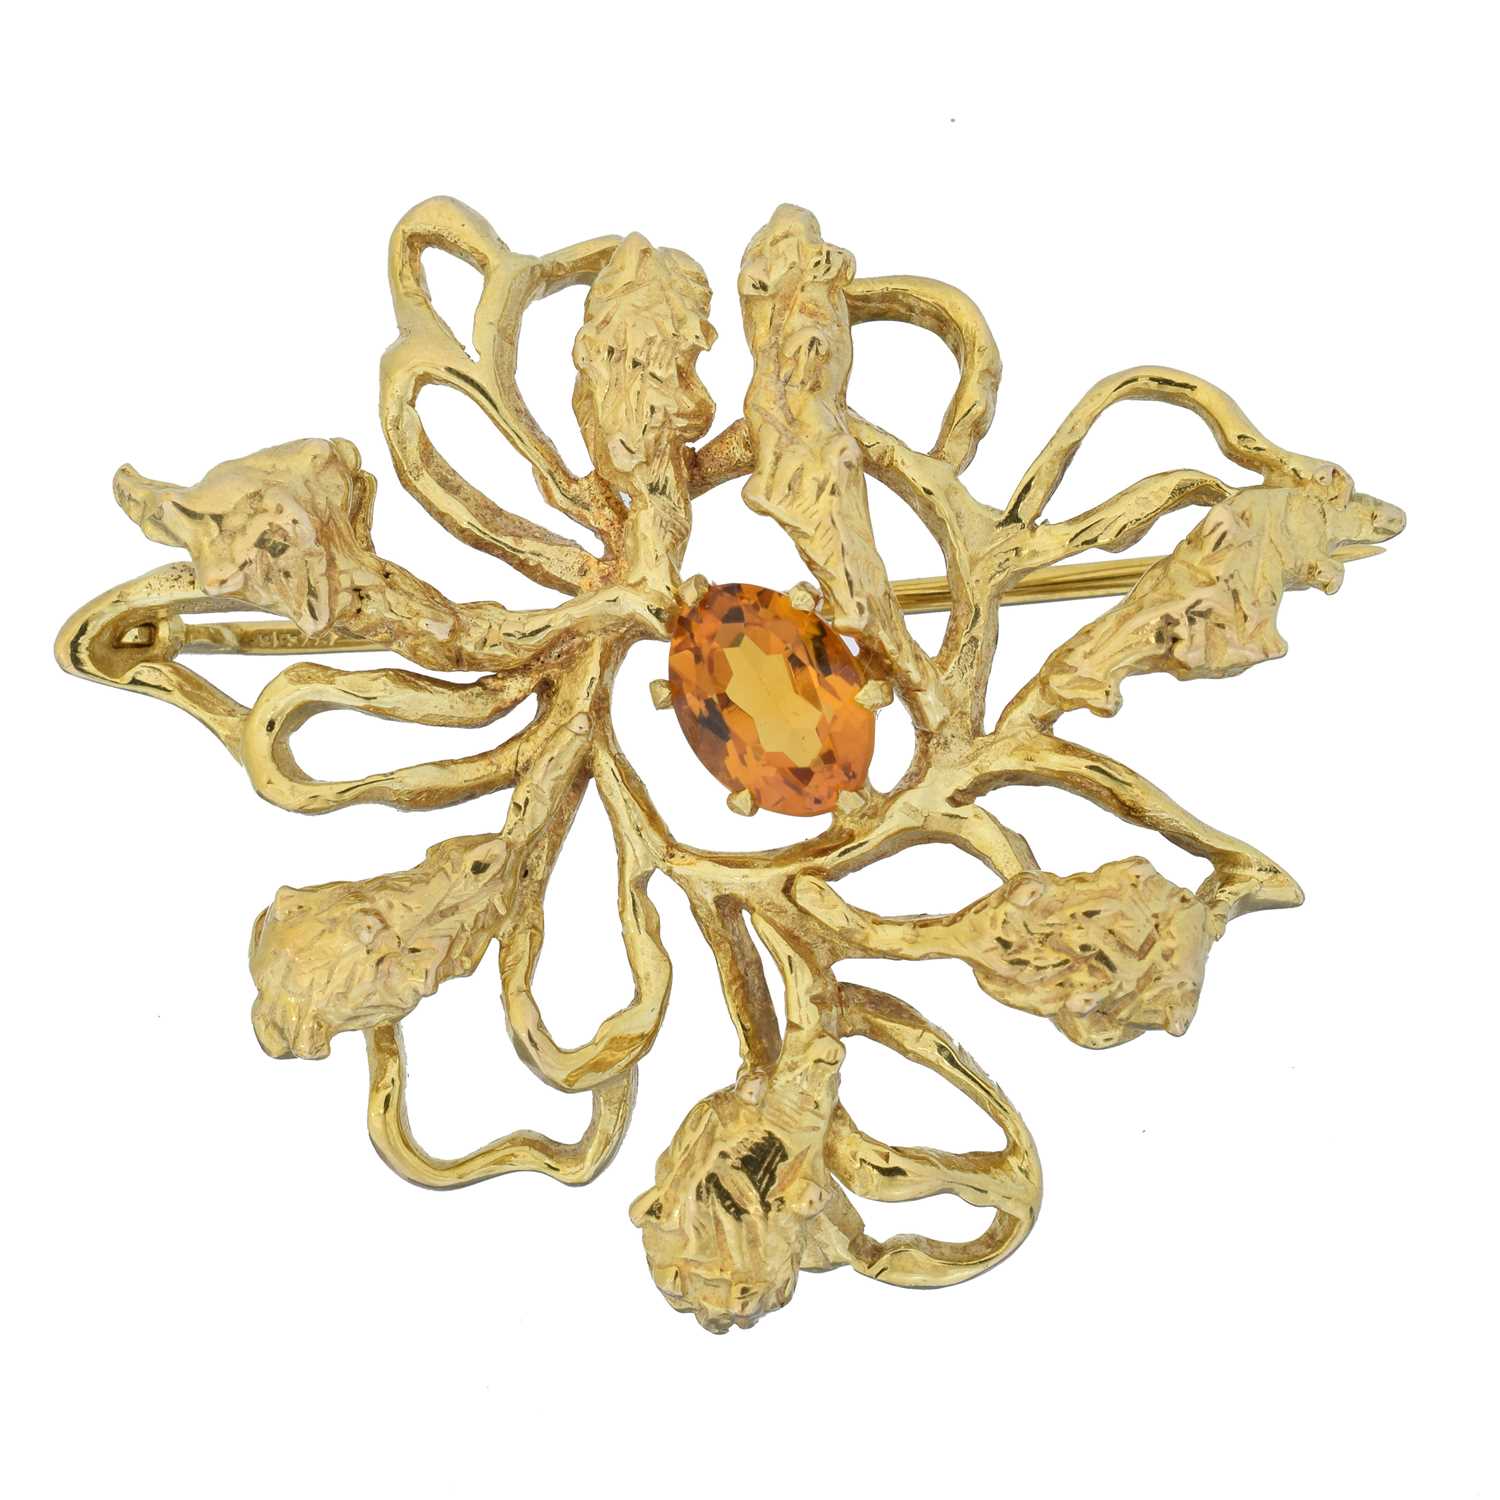 Lot 1 - A 9ct gold citrine brooch by Cropp & Farr